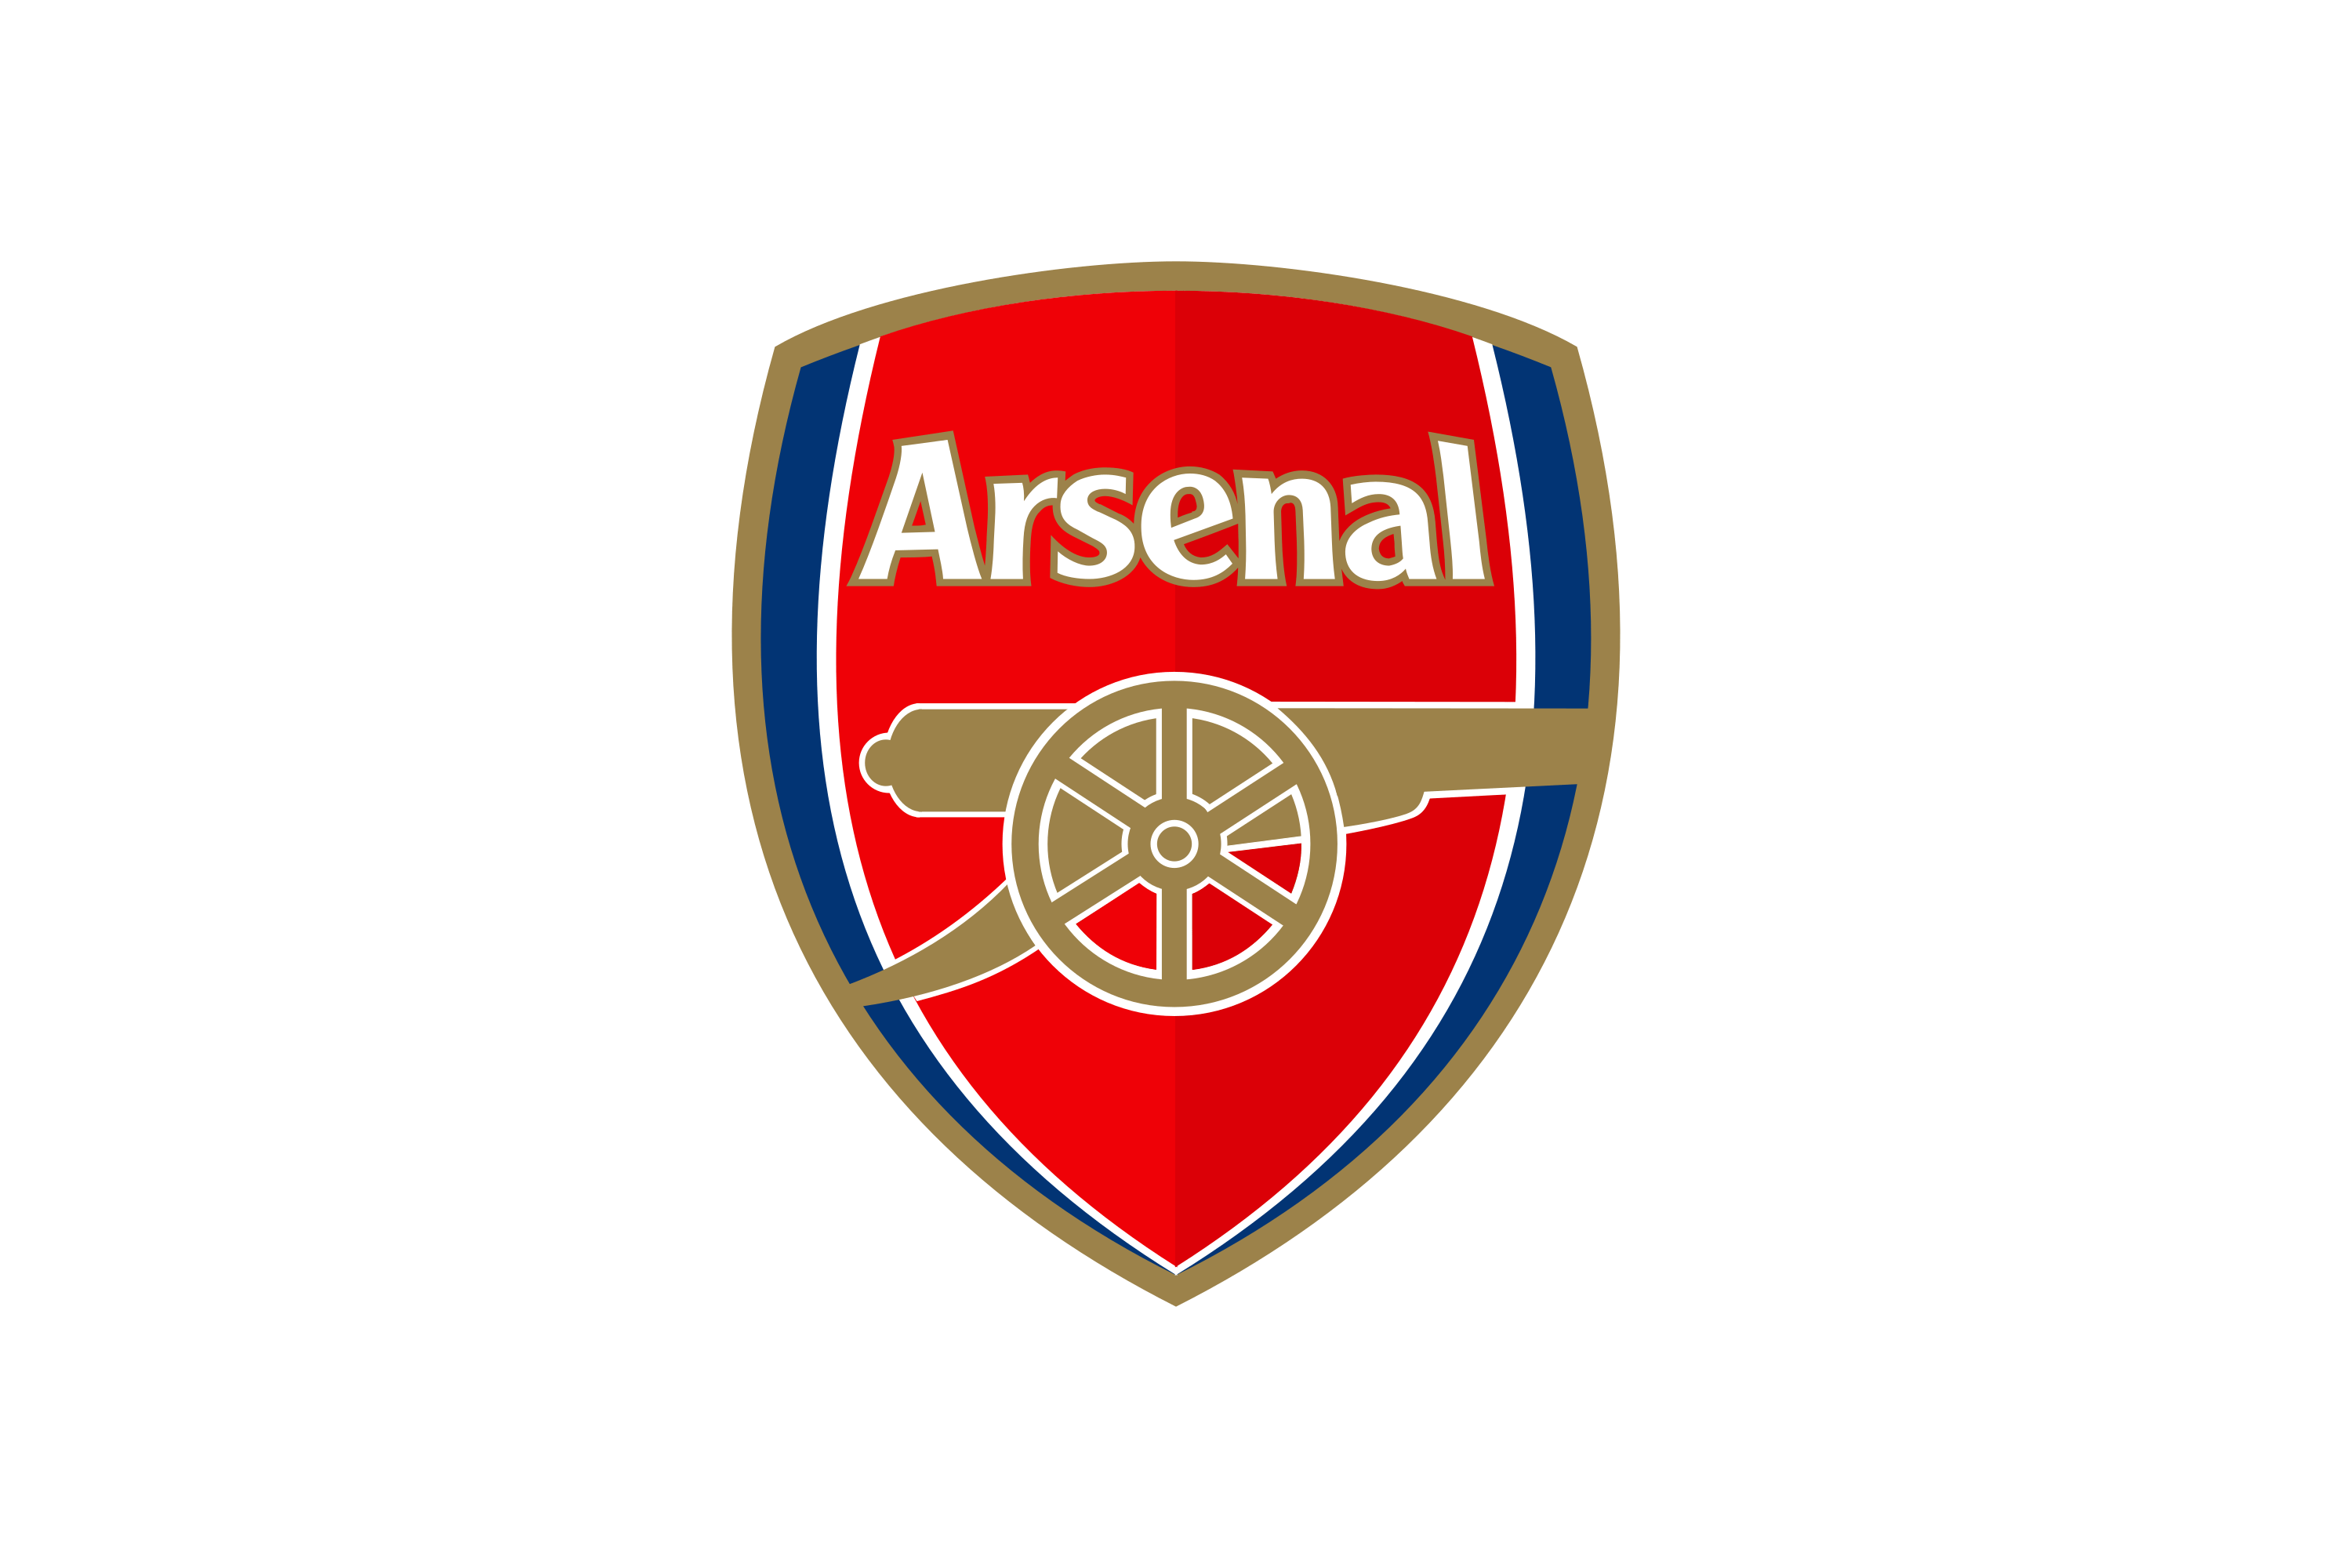 Download Arsenal F.C. (Arsenal Football Club) Logo in SVG Vector ...